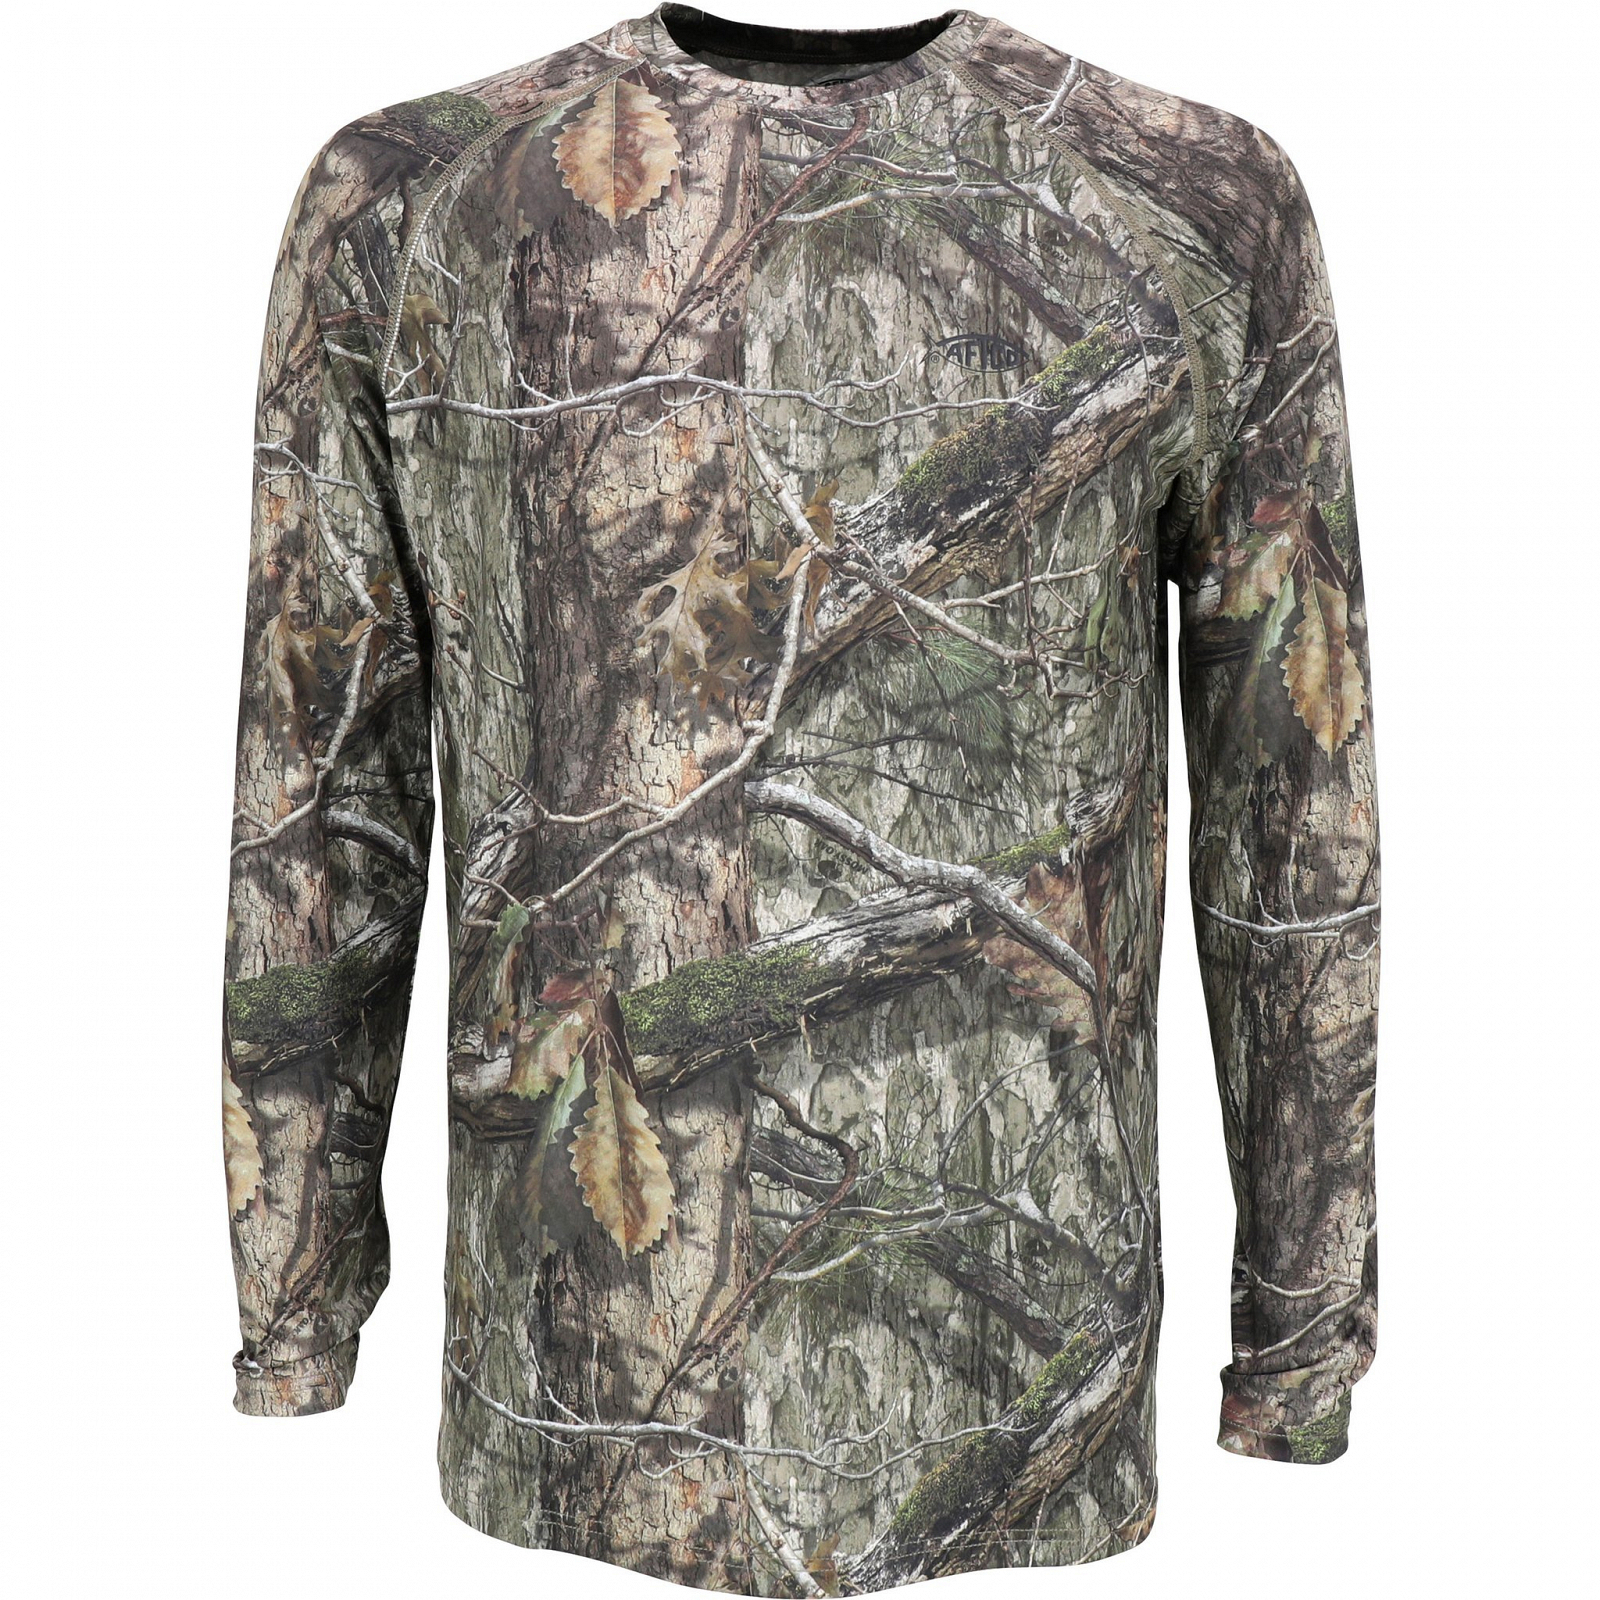 Aftco Youth Mossy Oak Camo LS Performance Shirt